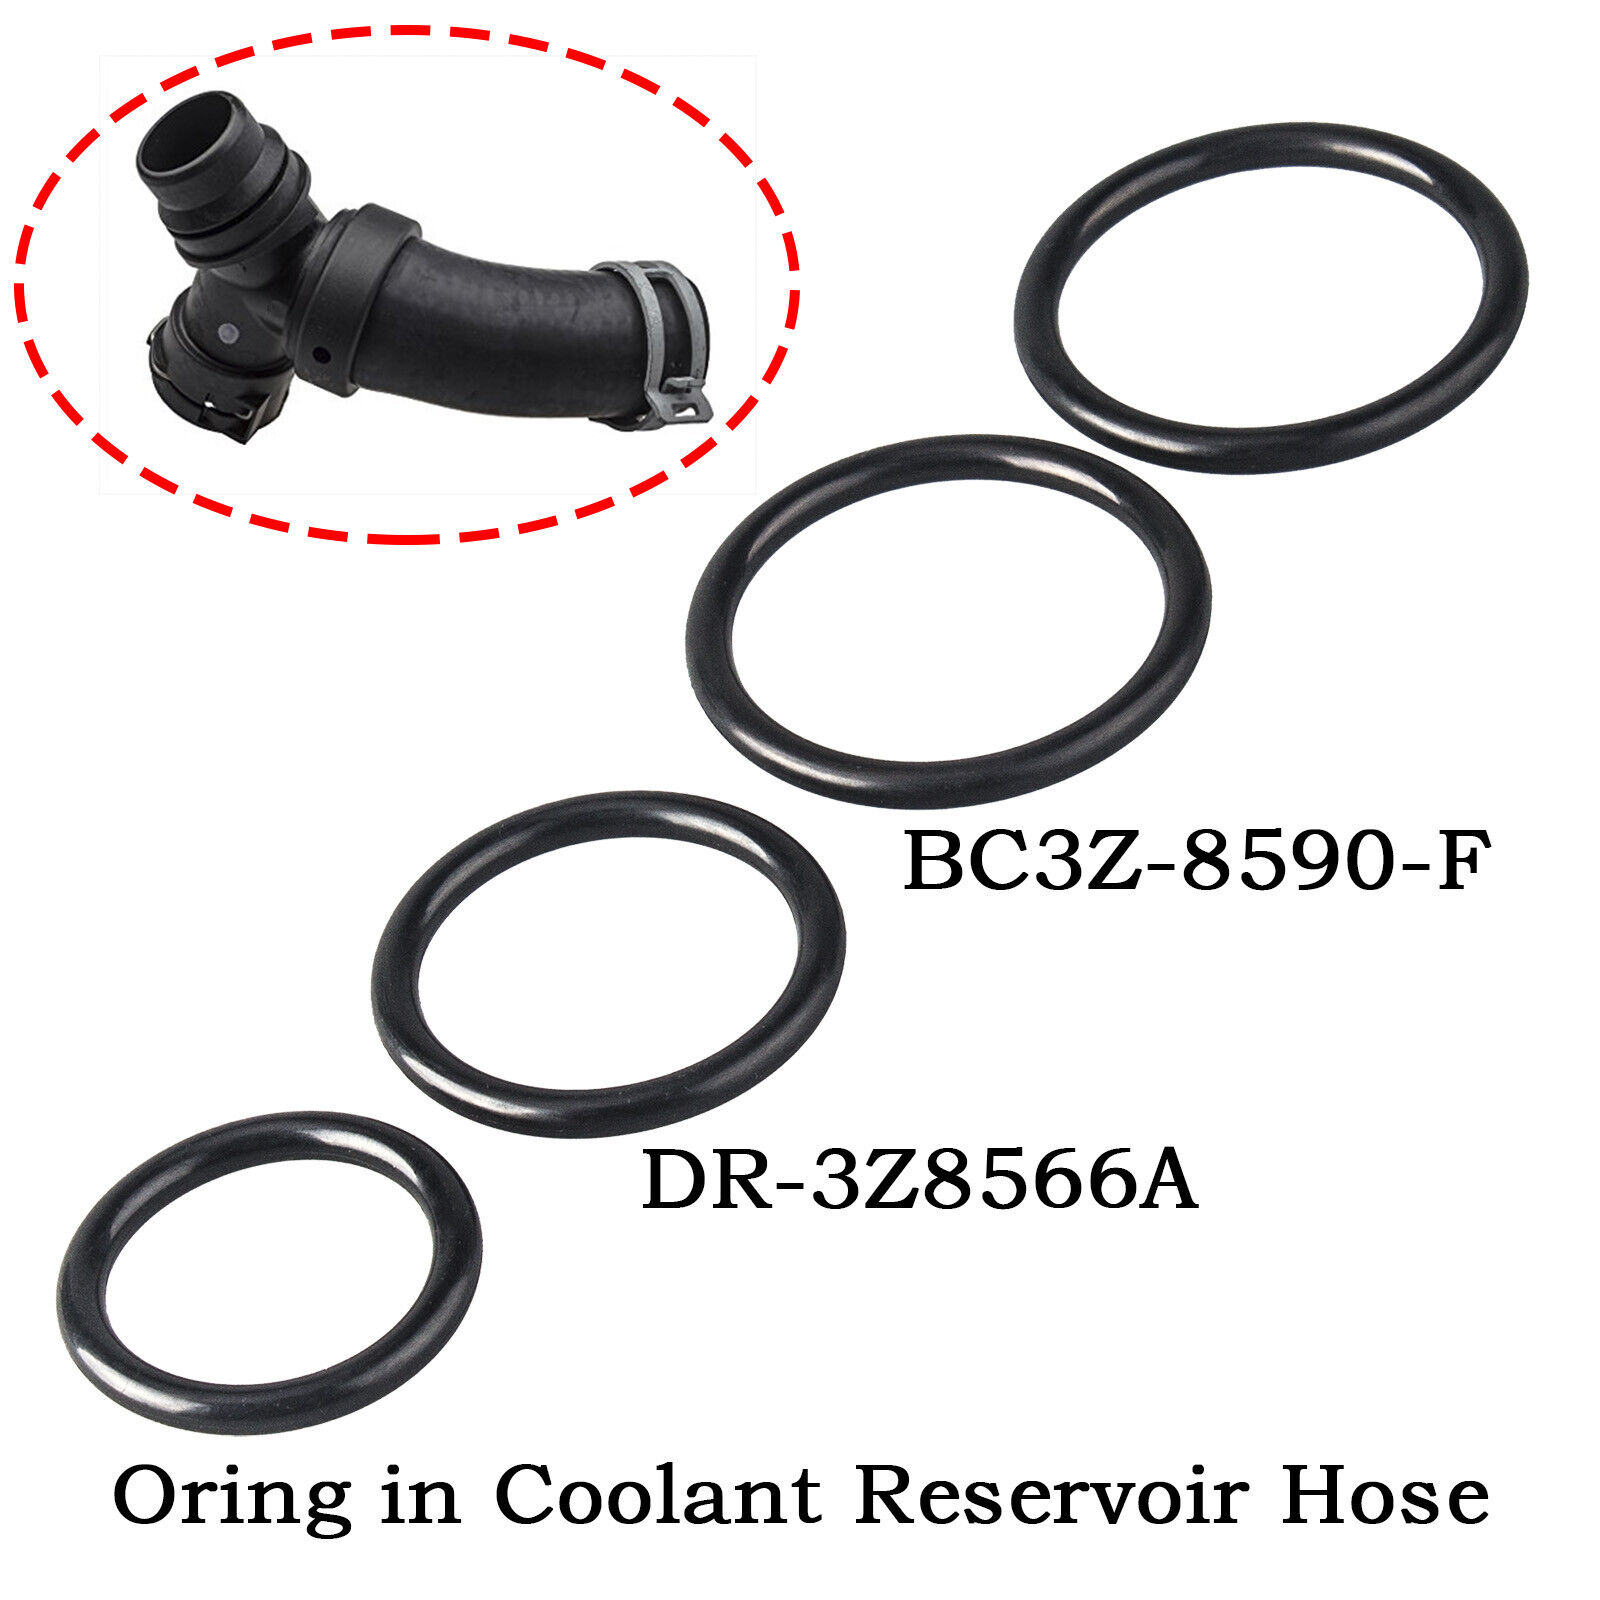 Replacement O-Rings For Ford F-150 DR-3Z8566-A, BC3Z-8590-F, & RESERVOIR HOSE